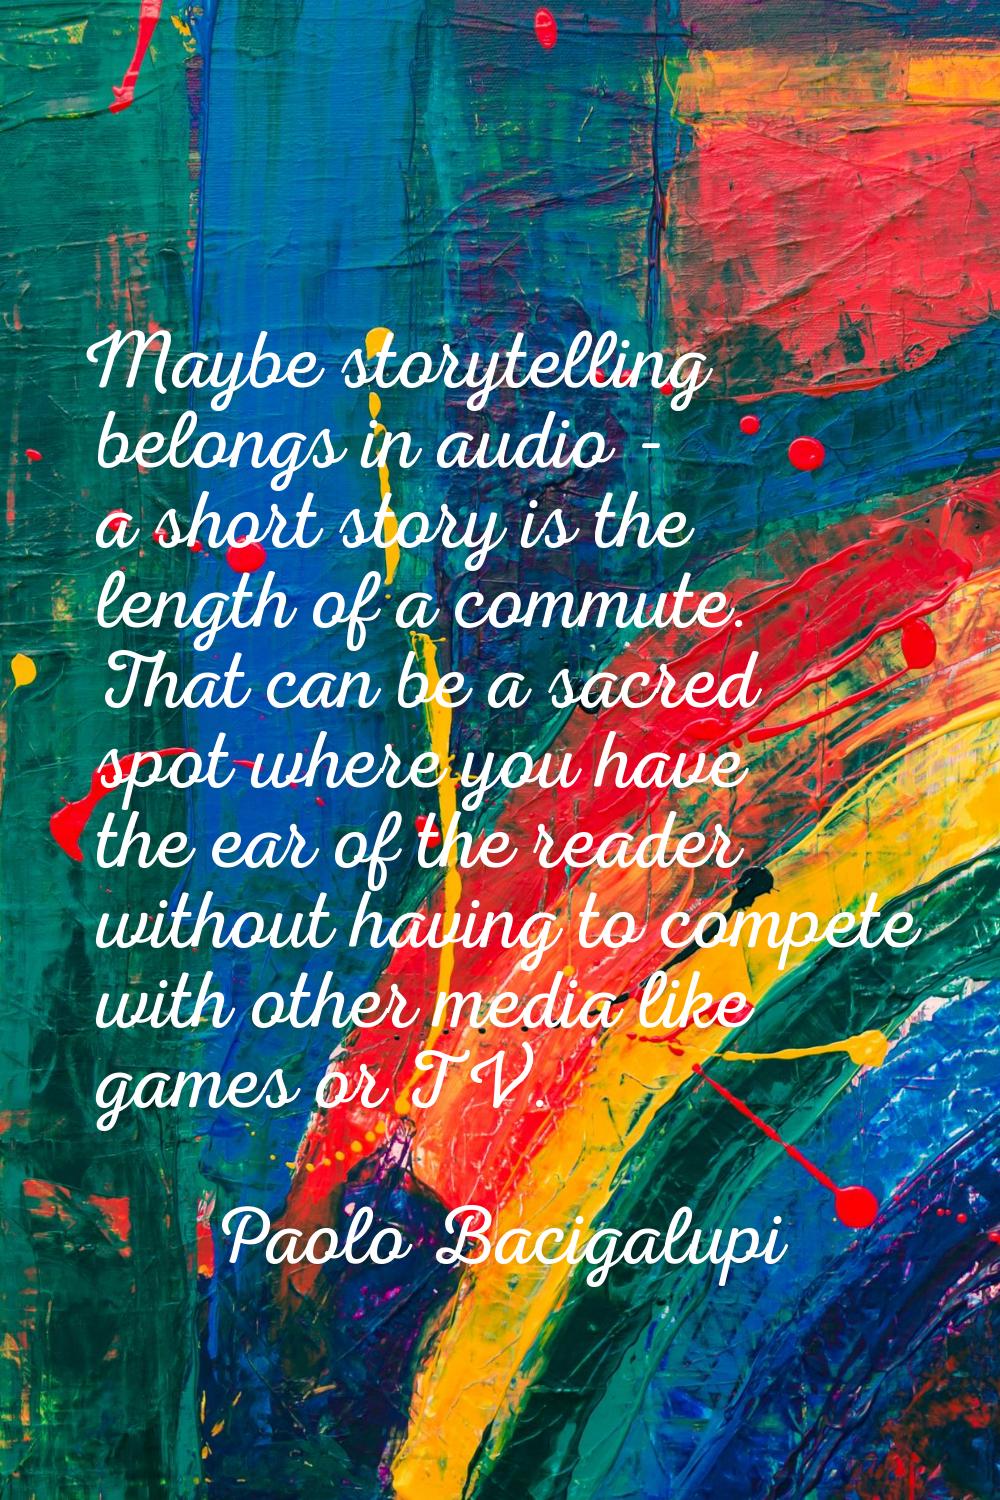 Maybe storytelling belongs in audio - a short story is the length of a commute. That can be a sacre